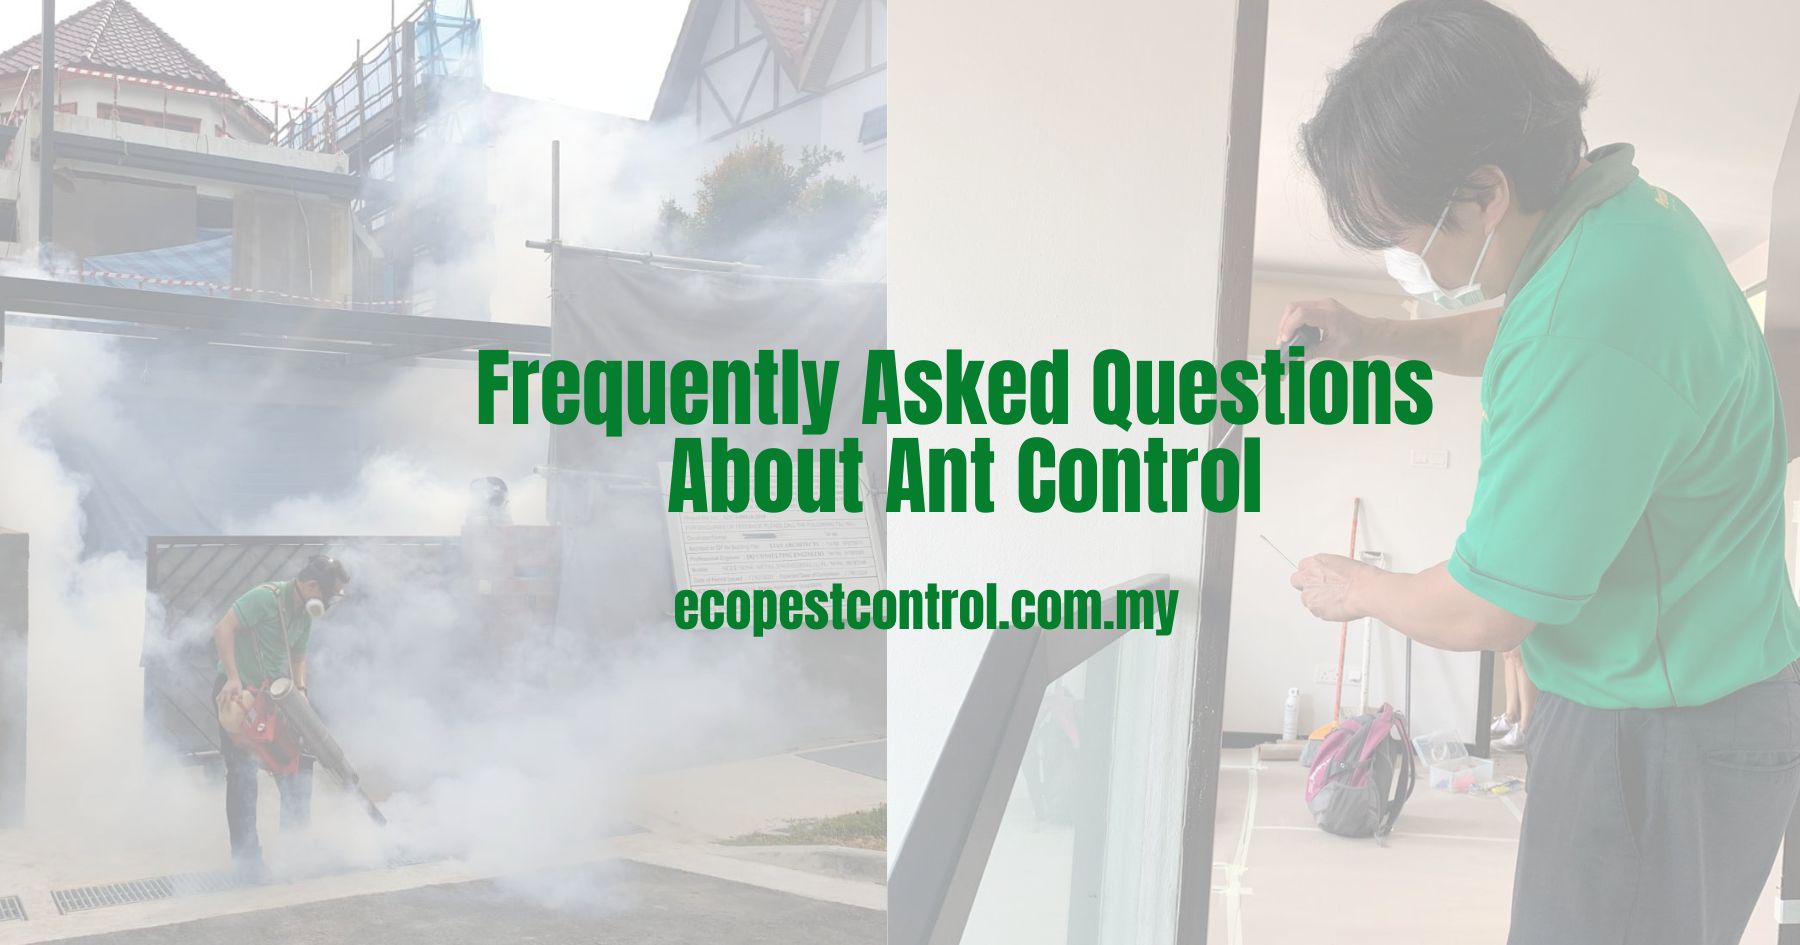 Frequently Asked Questions About Ant Control